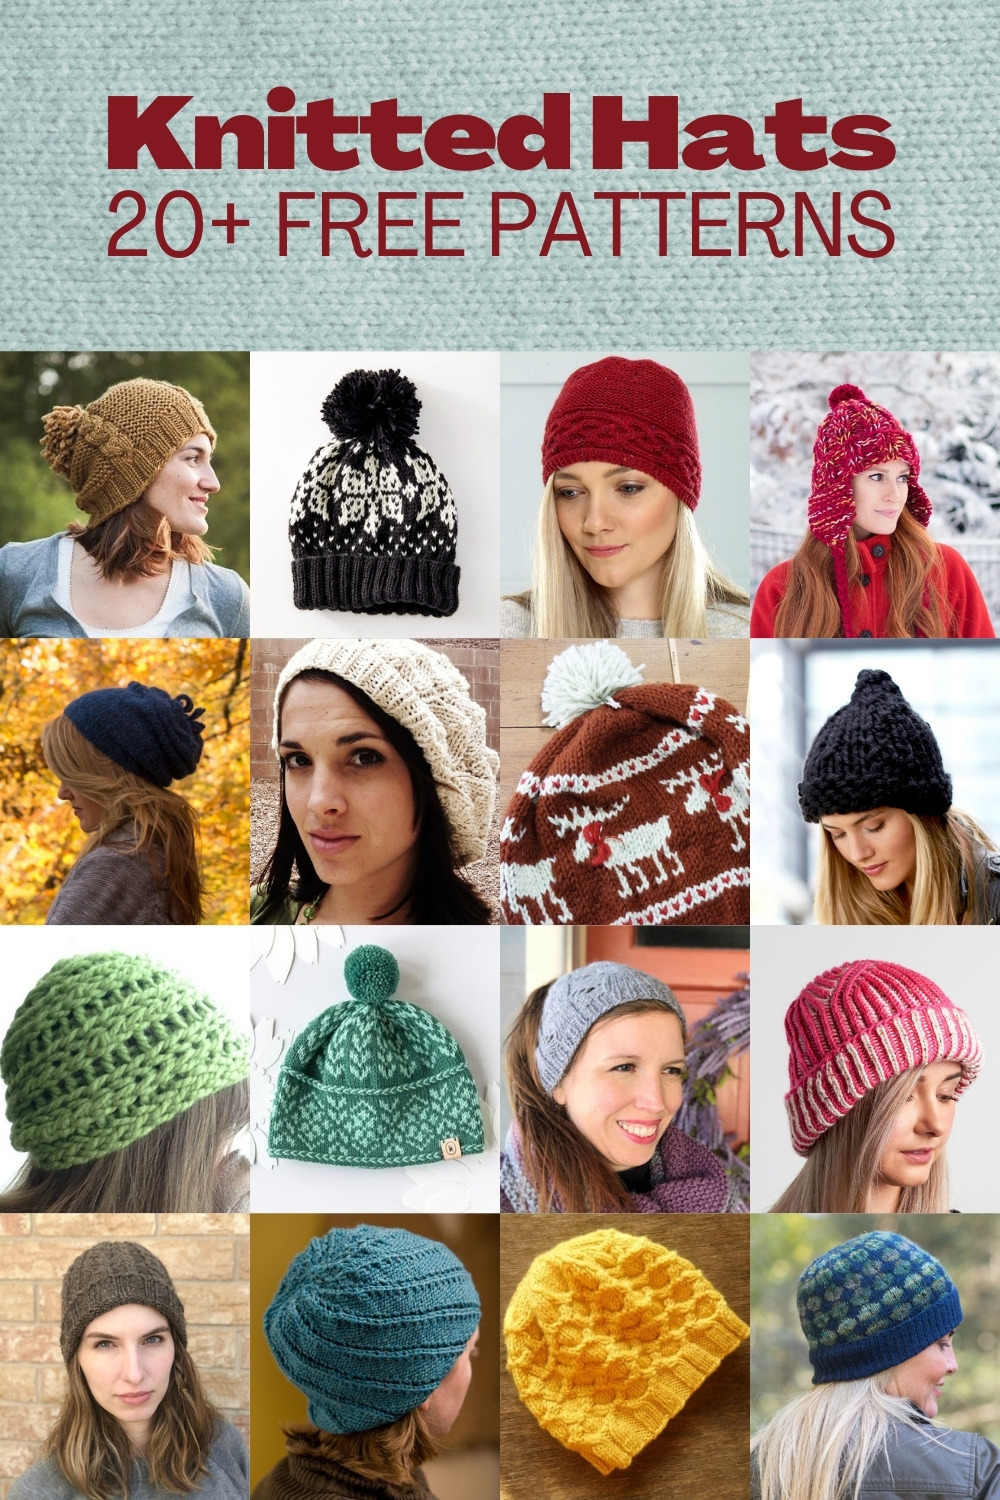 Over 20 free knitted hat patterns